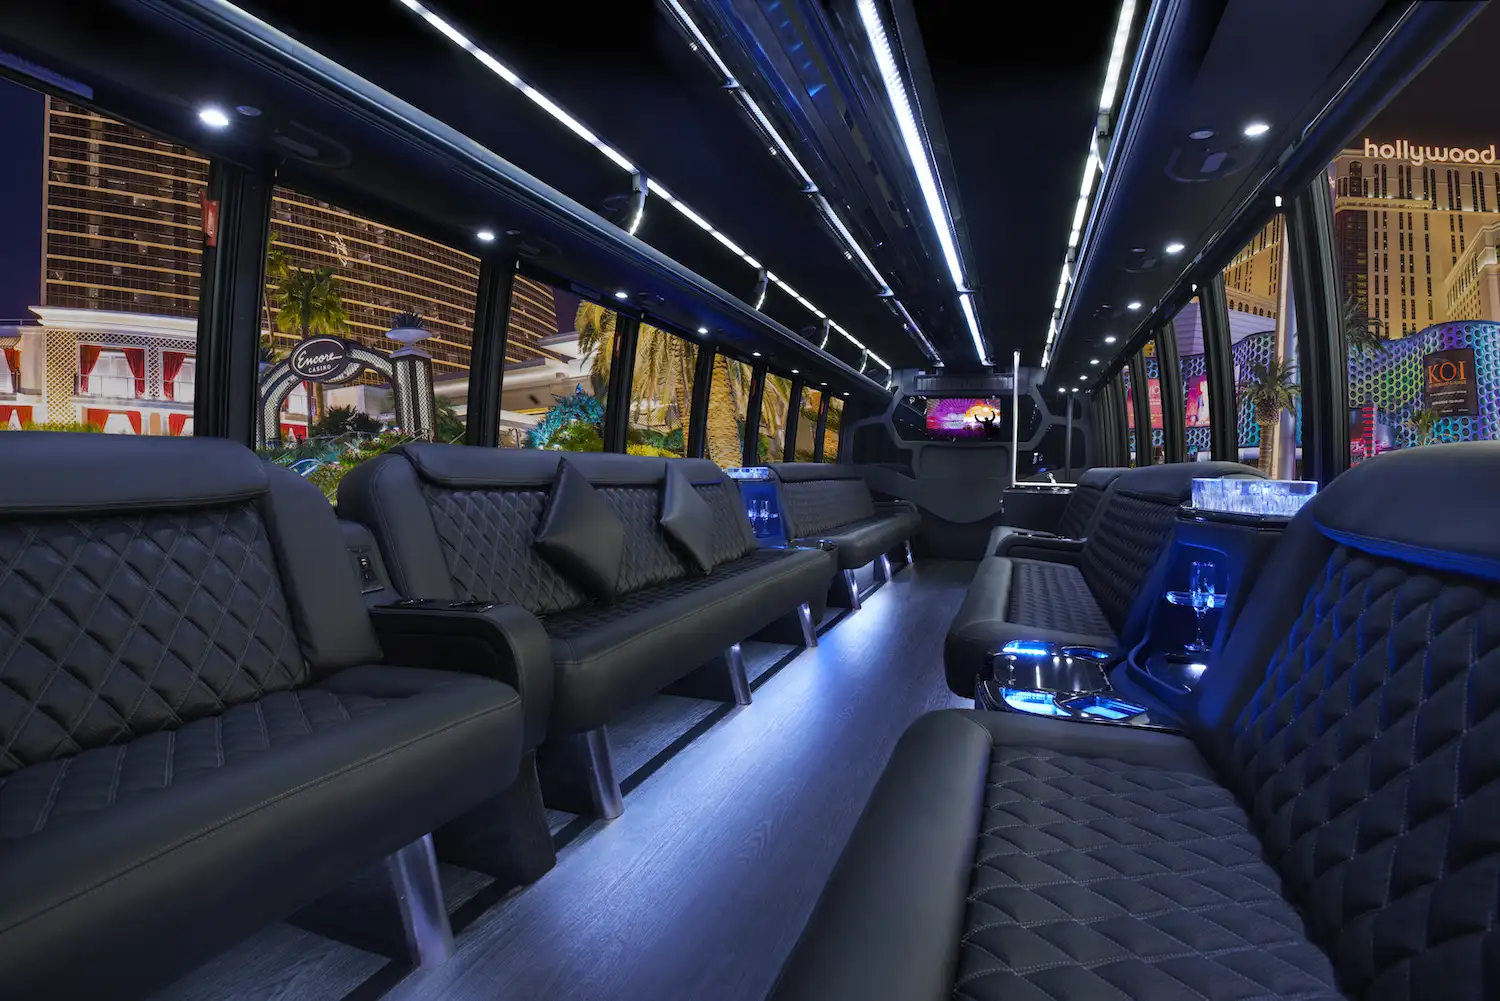 Inside the 40 person party bus with restroom